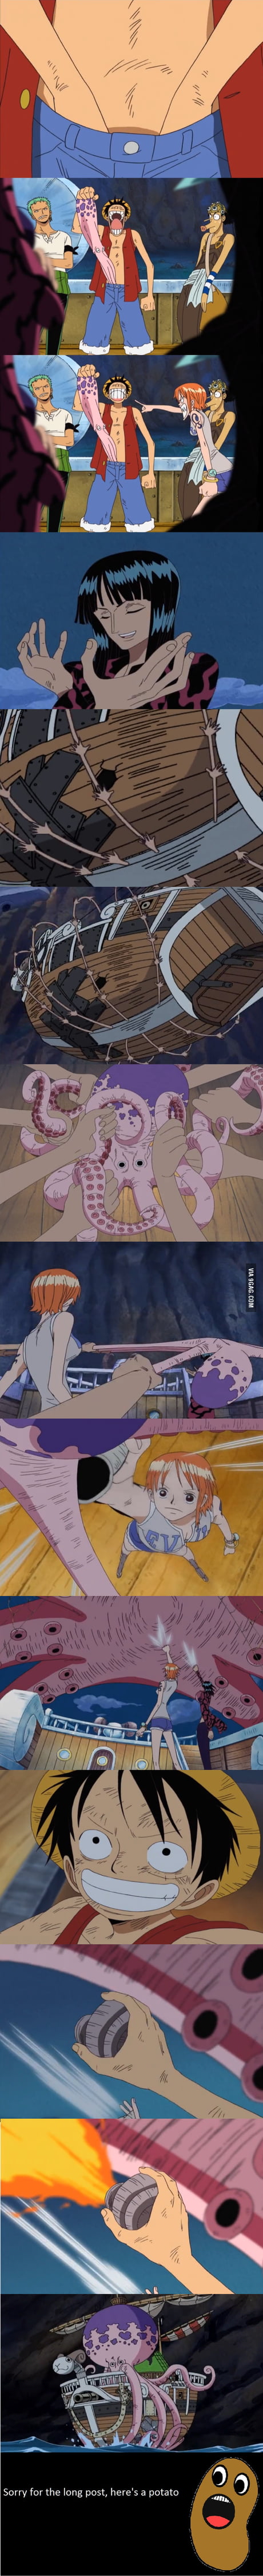 Oh The Poor Octopus One Piece Episode 6 9gag